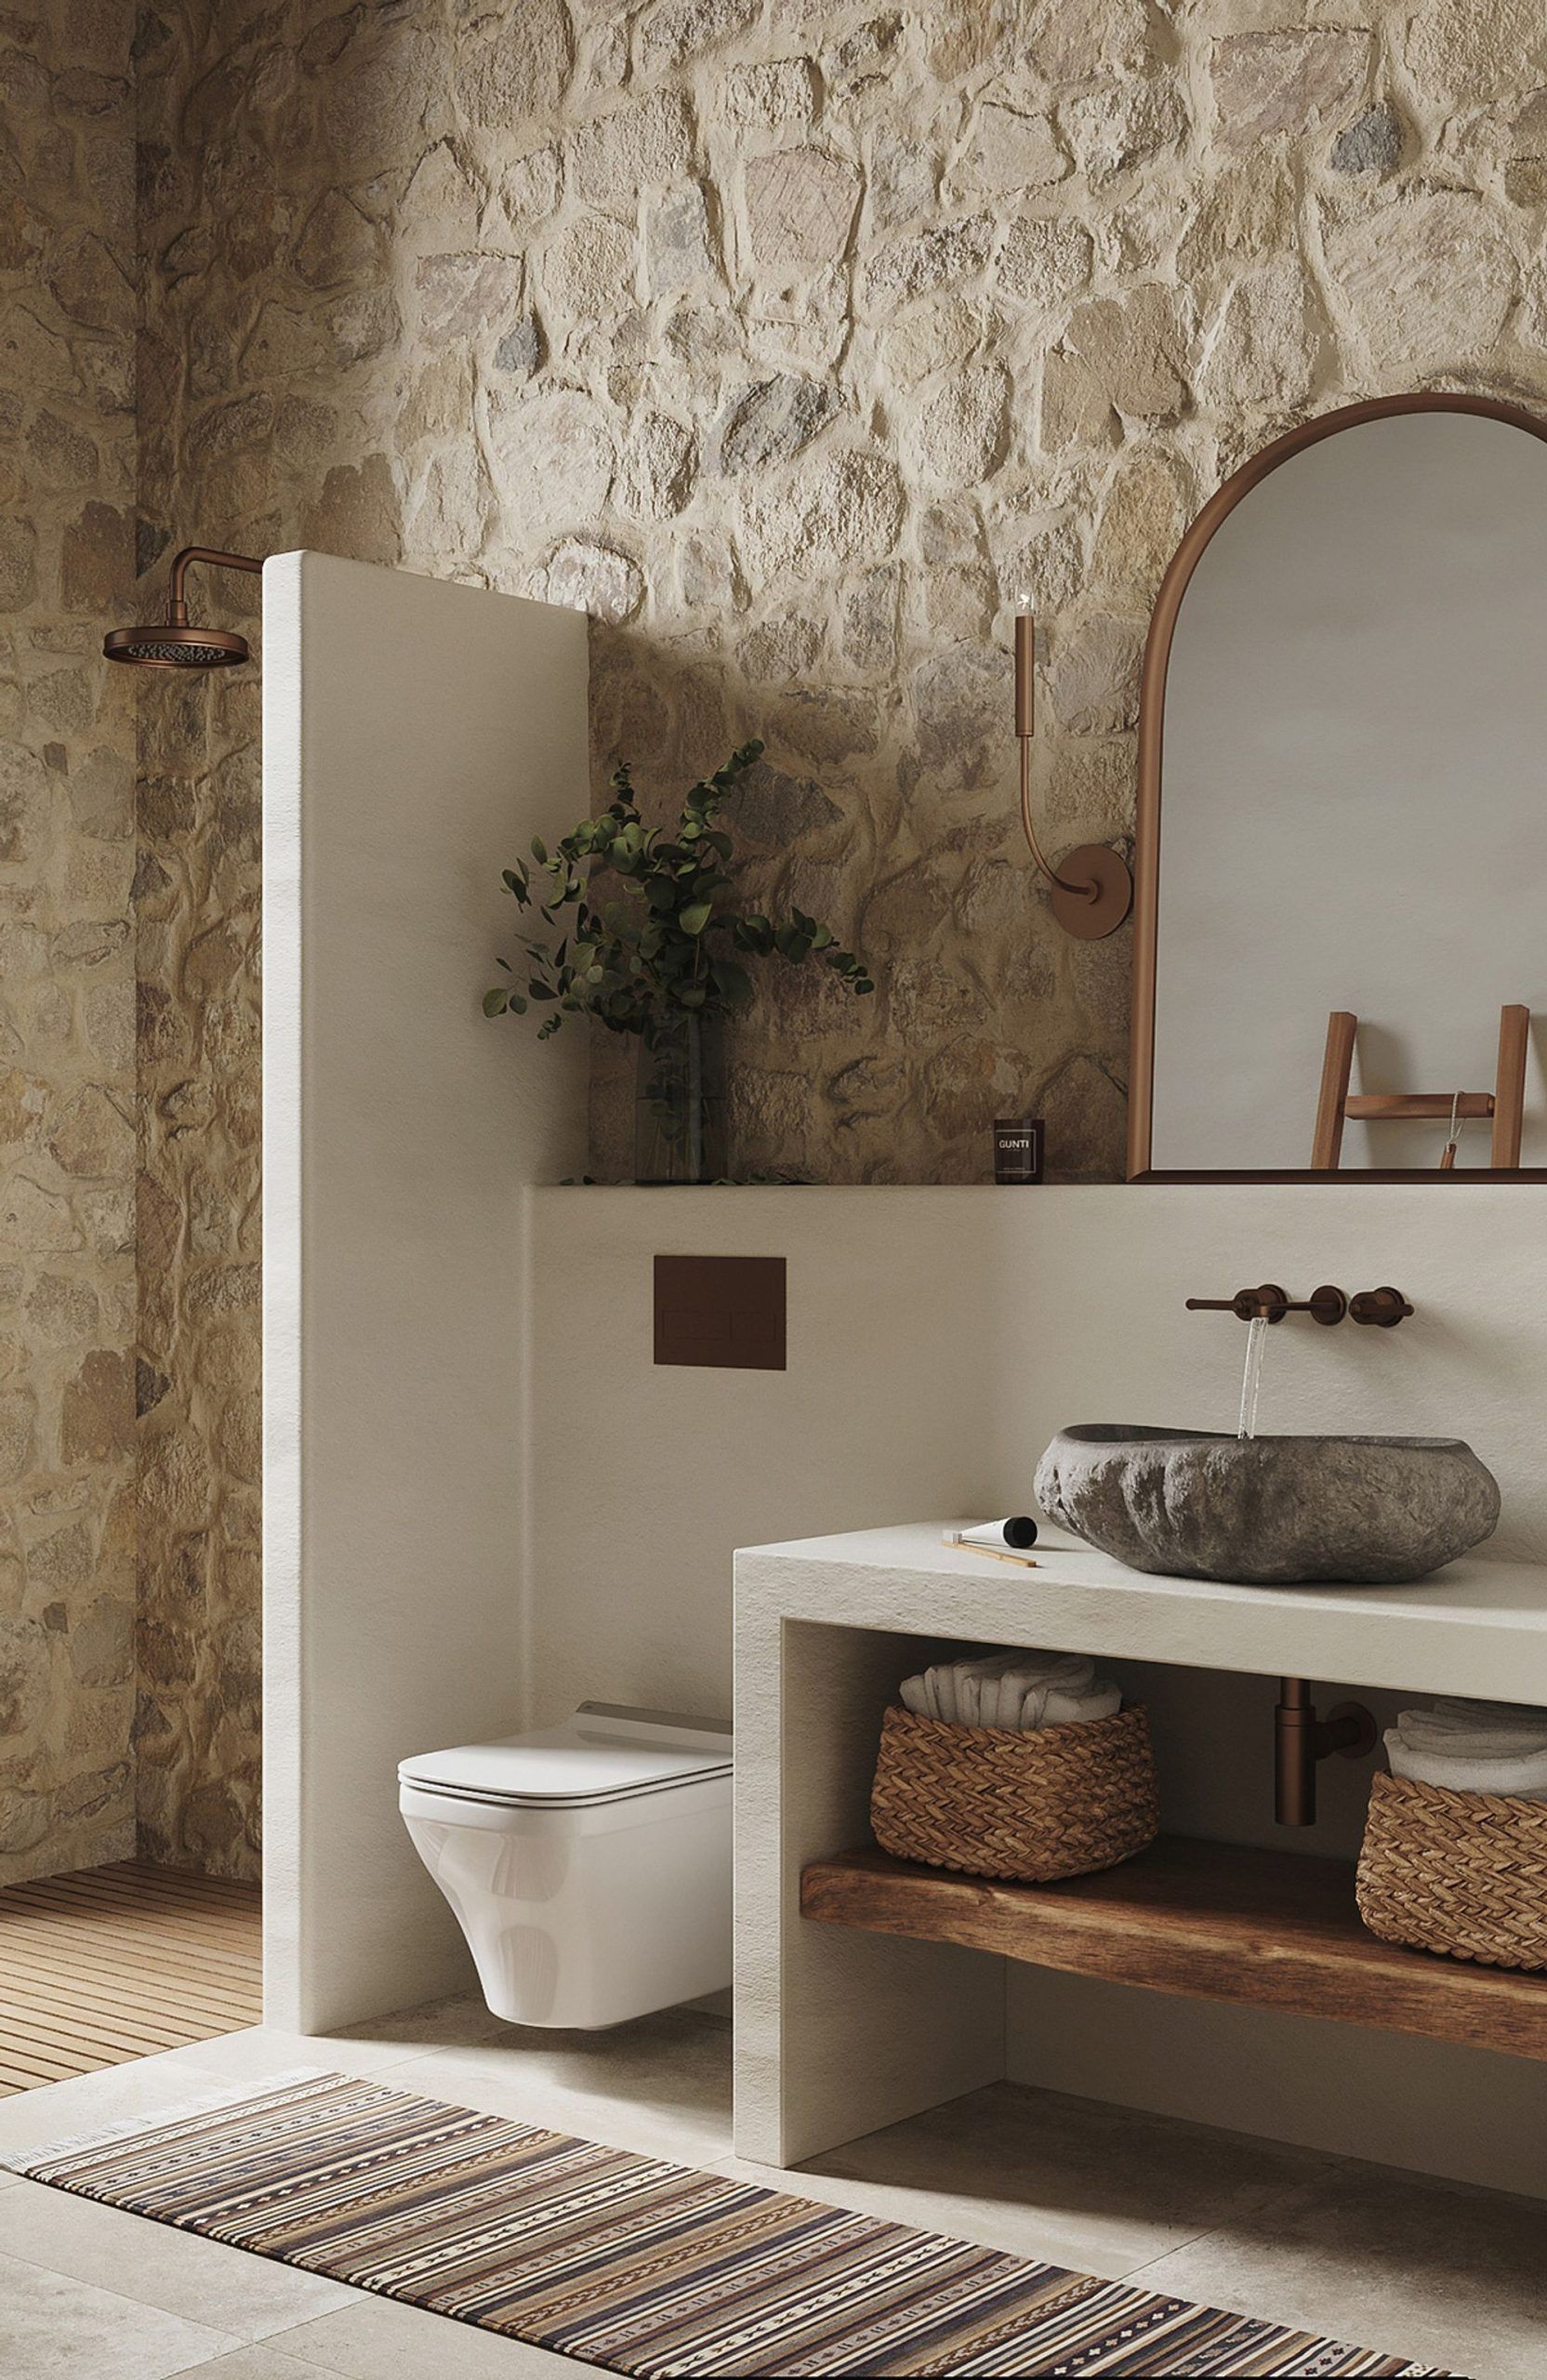 A Rustic Meets Boho Interior With Authentic Stone Feature Walls | Bathroom Interior Design